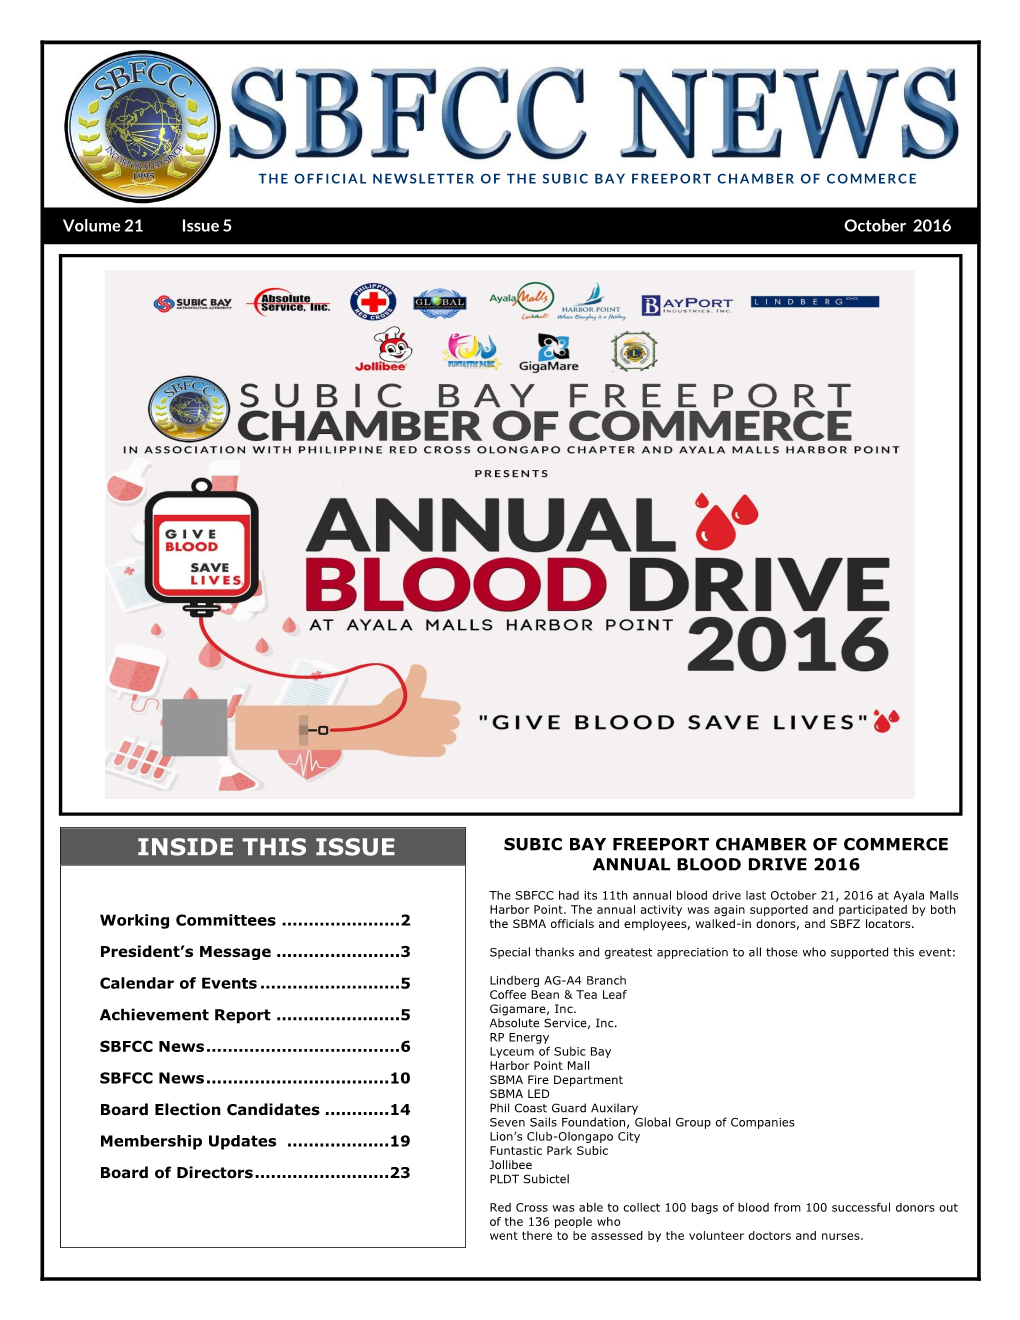 Inside This Issue Subic Bay Freeport Chamber of Commerce Annual Blood Drive 2016